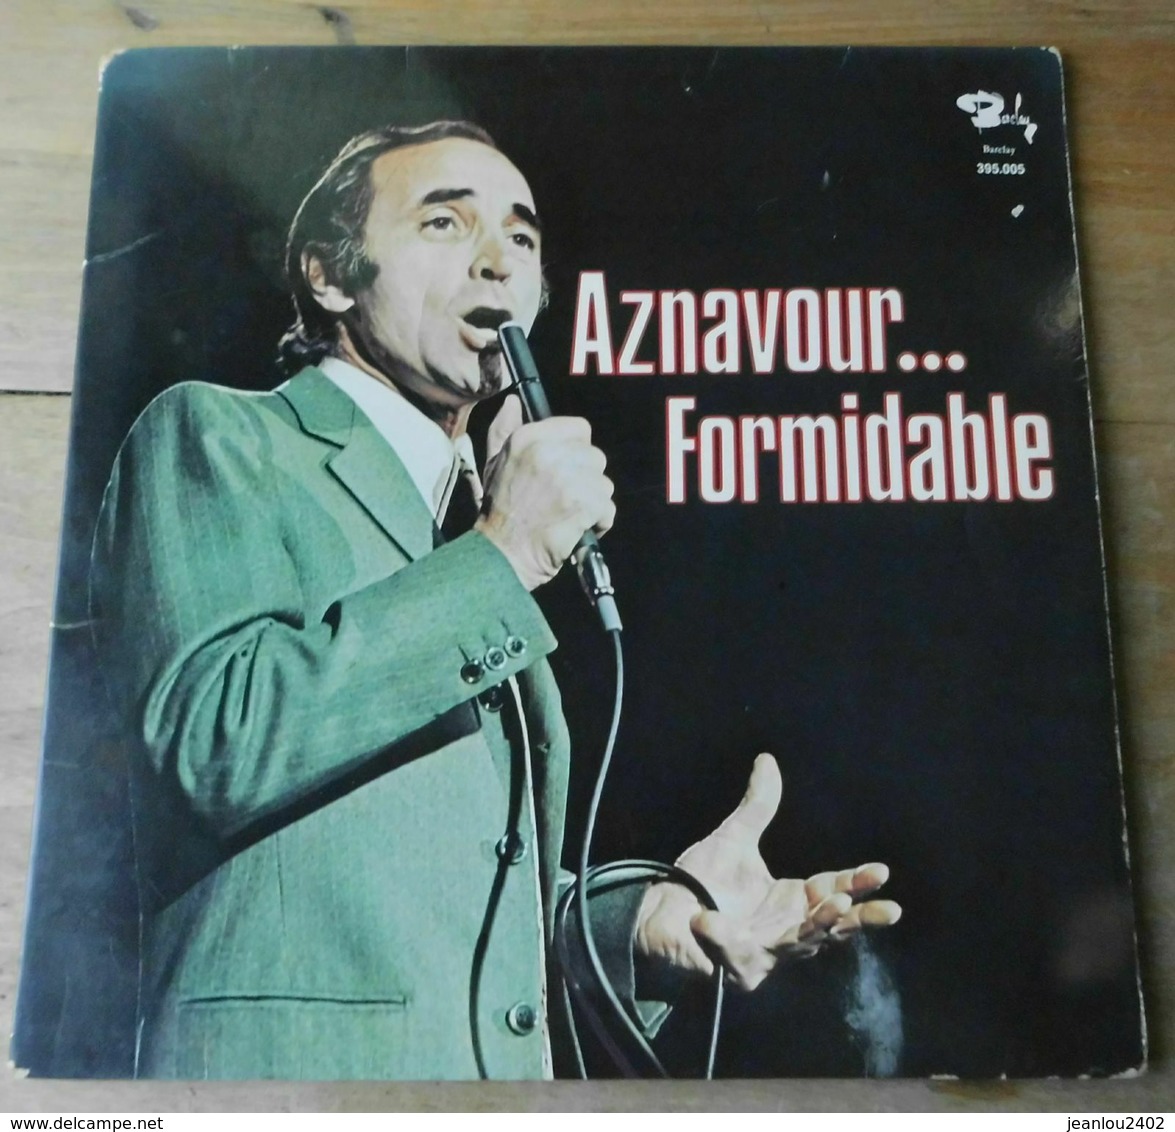 Vinyle "Aznavour" "Formidable" - Collector's Editions